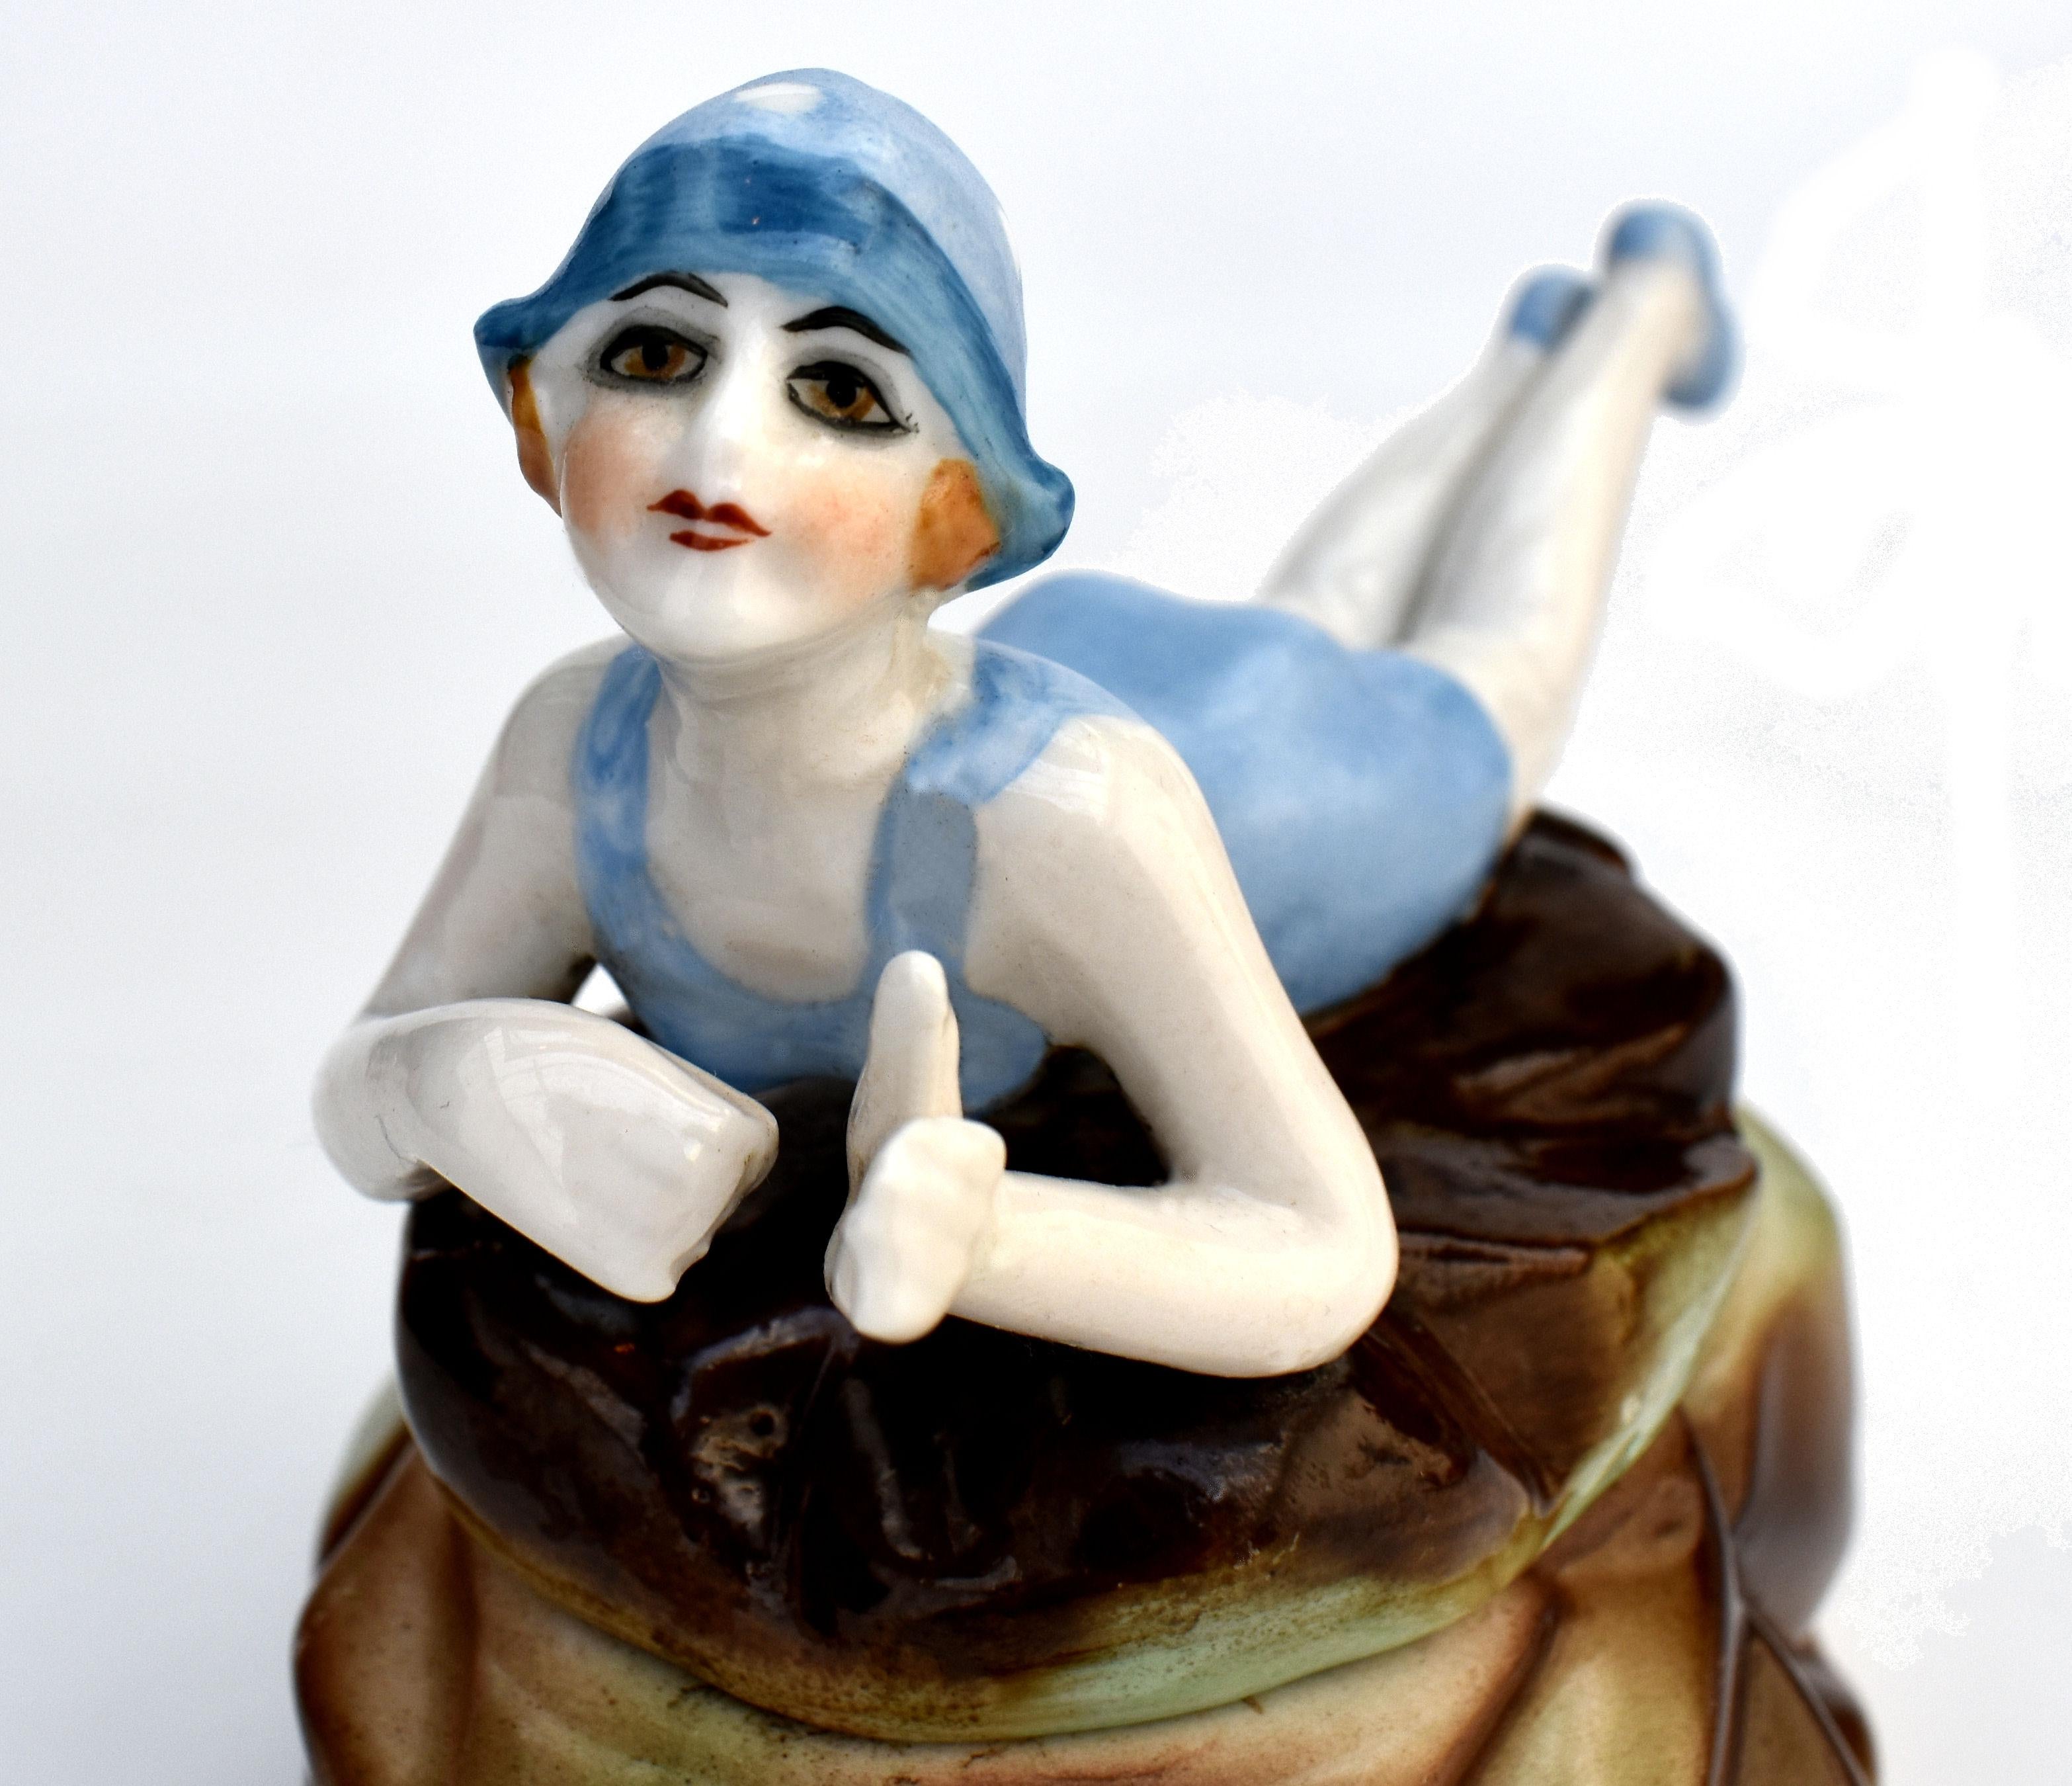 Not to be confused with the many reproductions of bathing belles circulating at the moment, this is an original 1930's Art Deco bathing belle sat upon a rock with her parasol open shading her from the bright sunshine. A rare Art Deco trinket box is